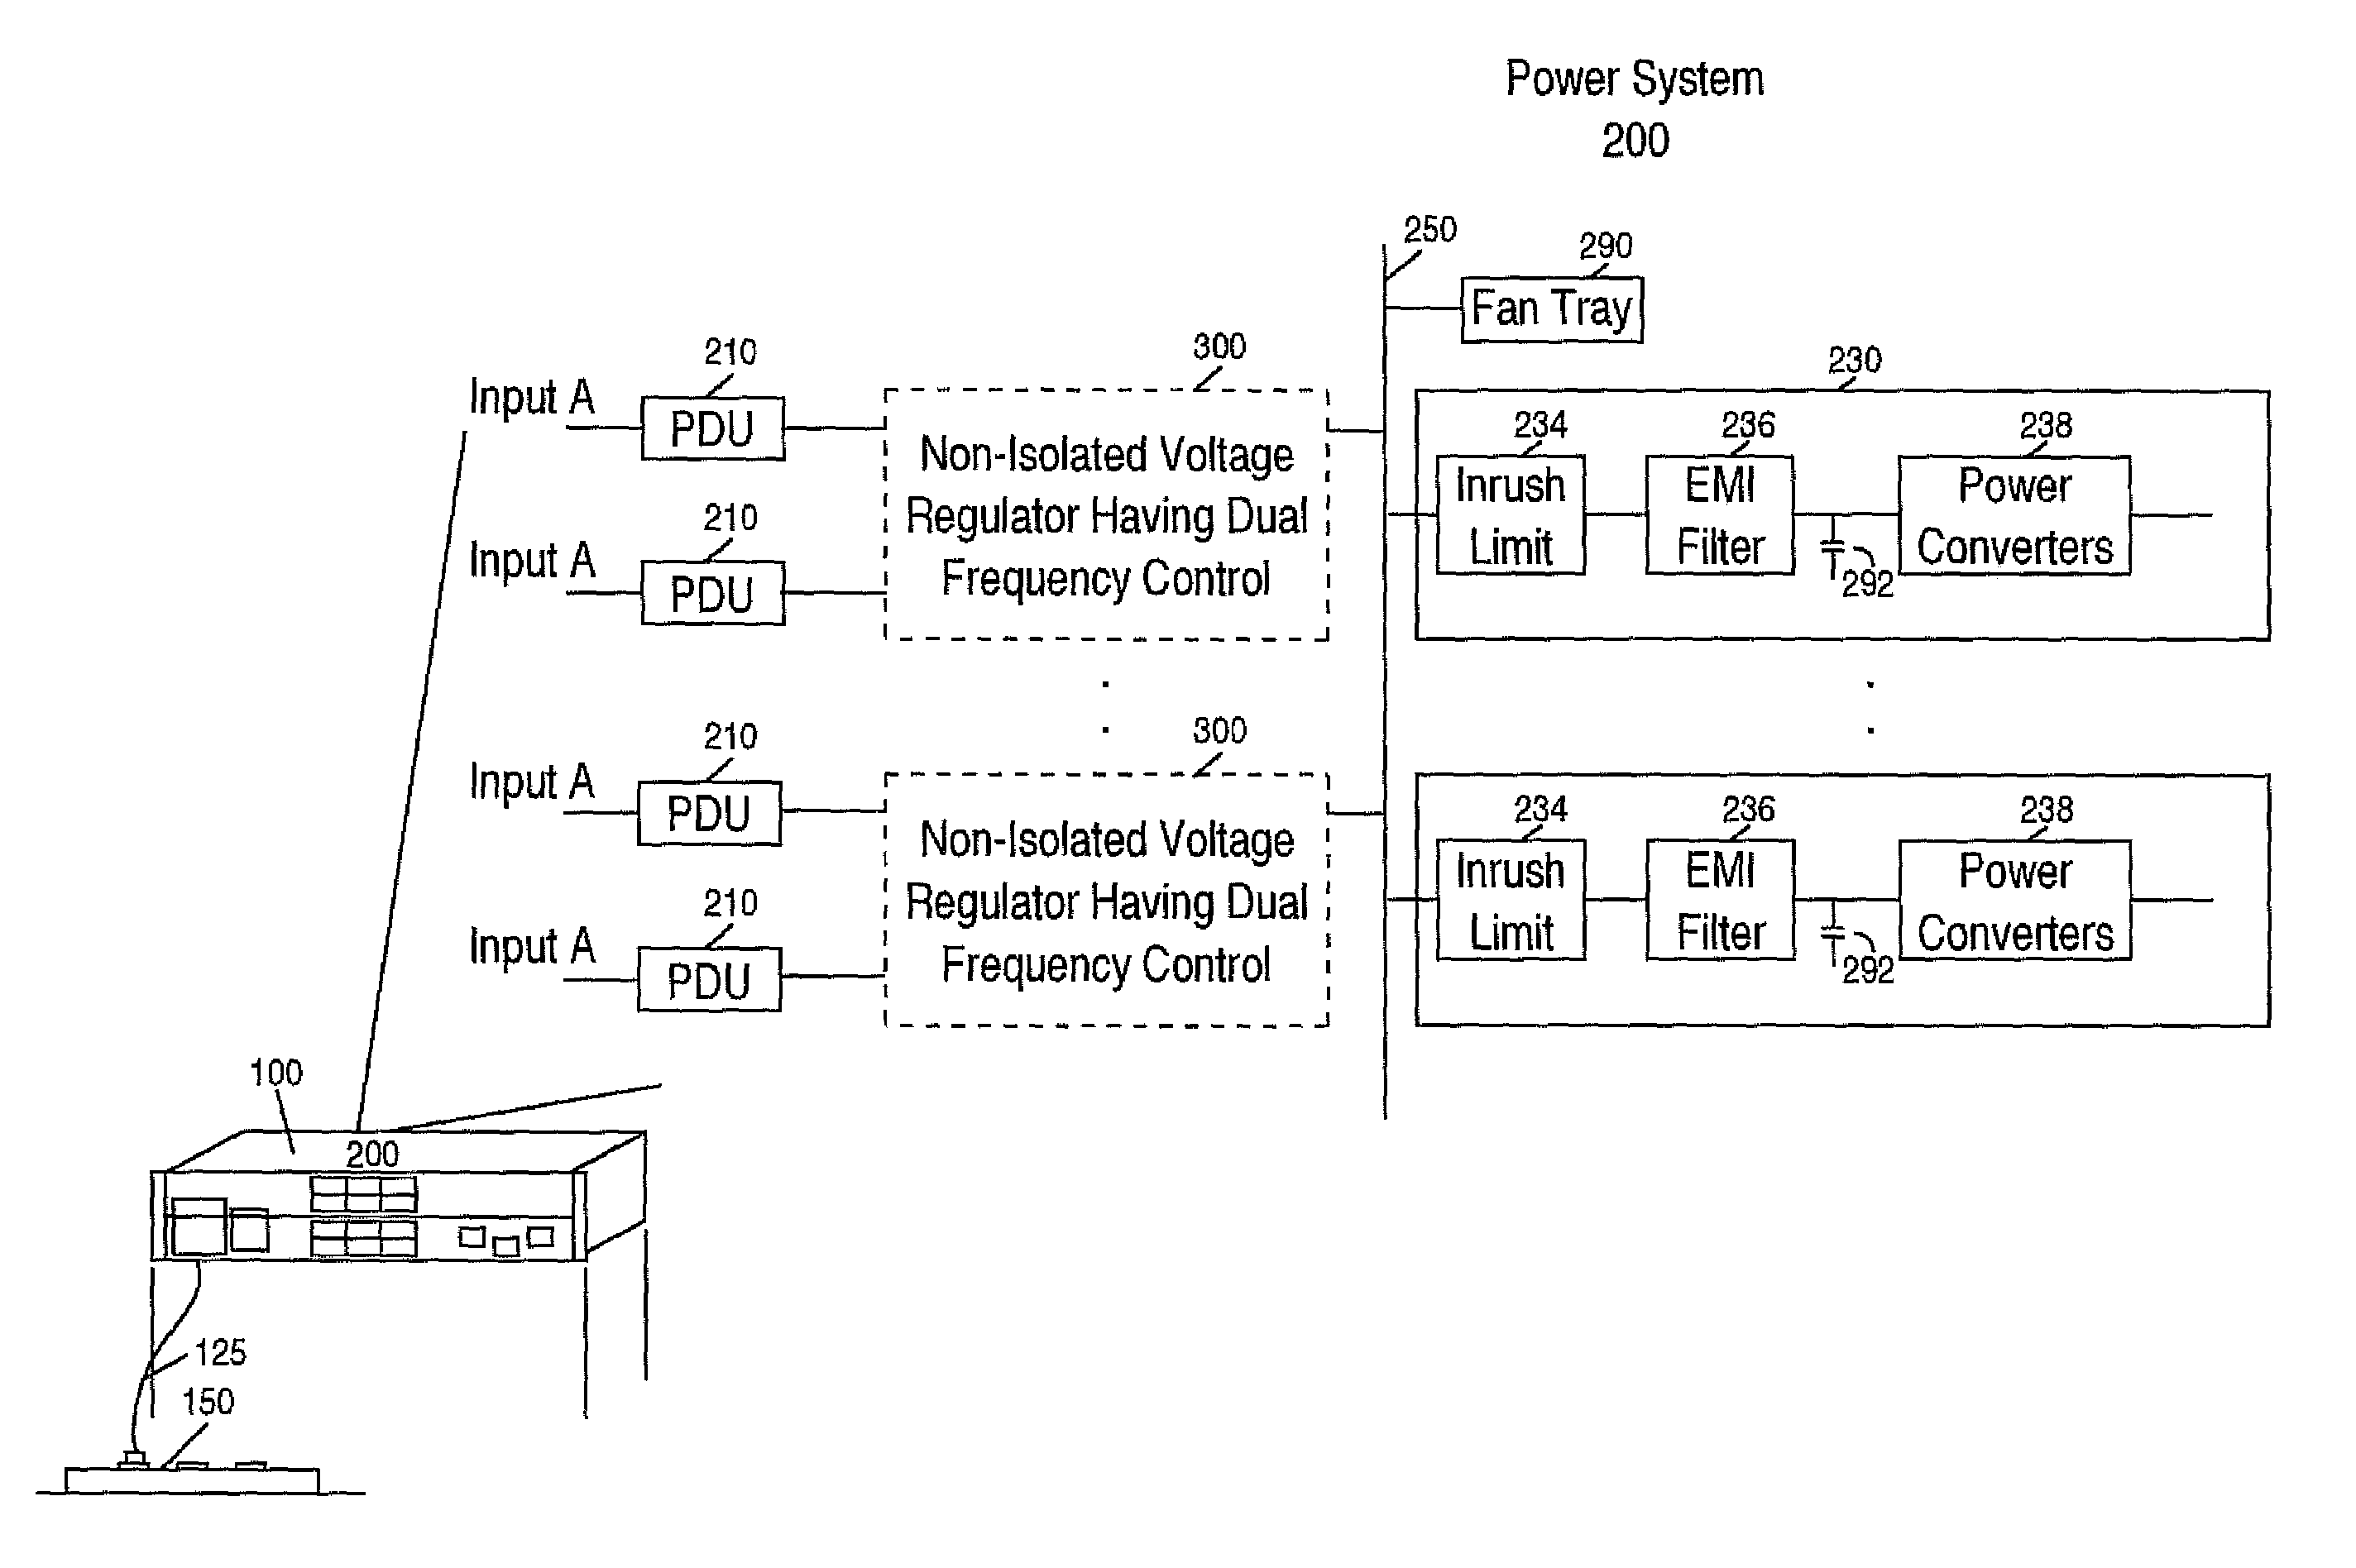 Dual frequency control of buck-boost regulator with a pass through band